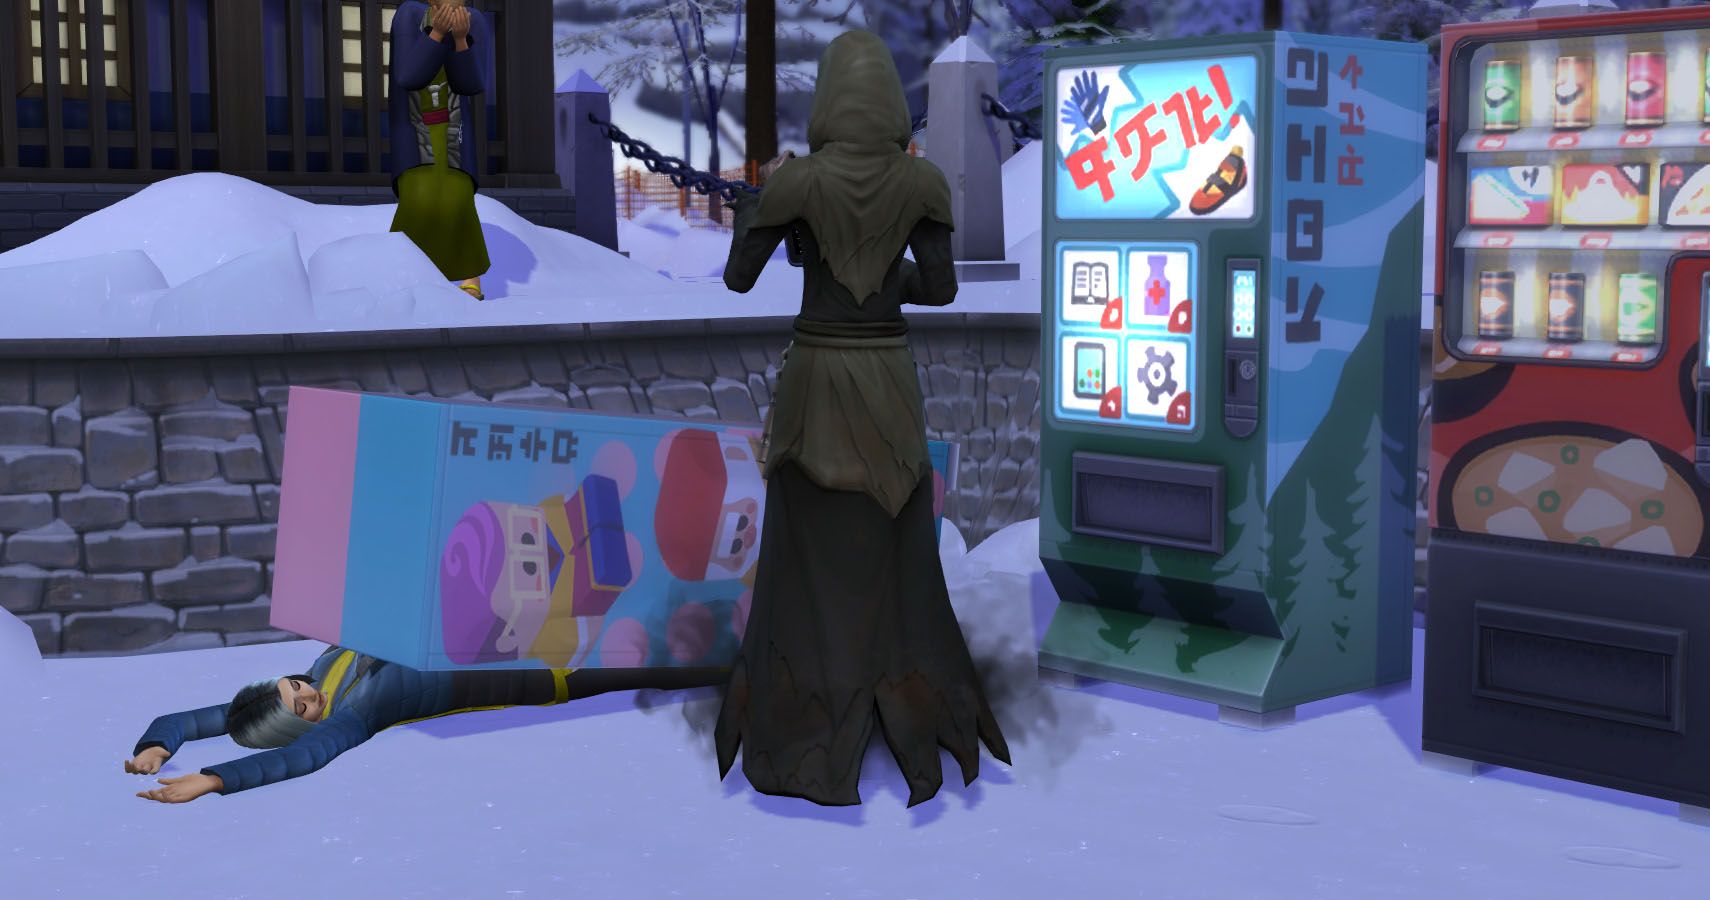 vending machine death in the sims 4